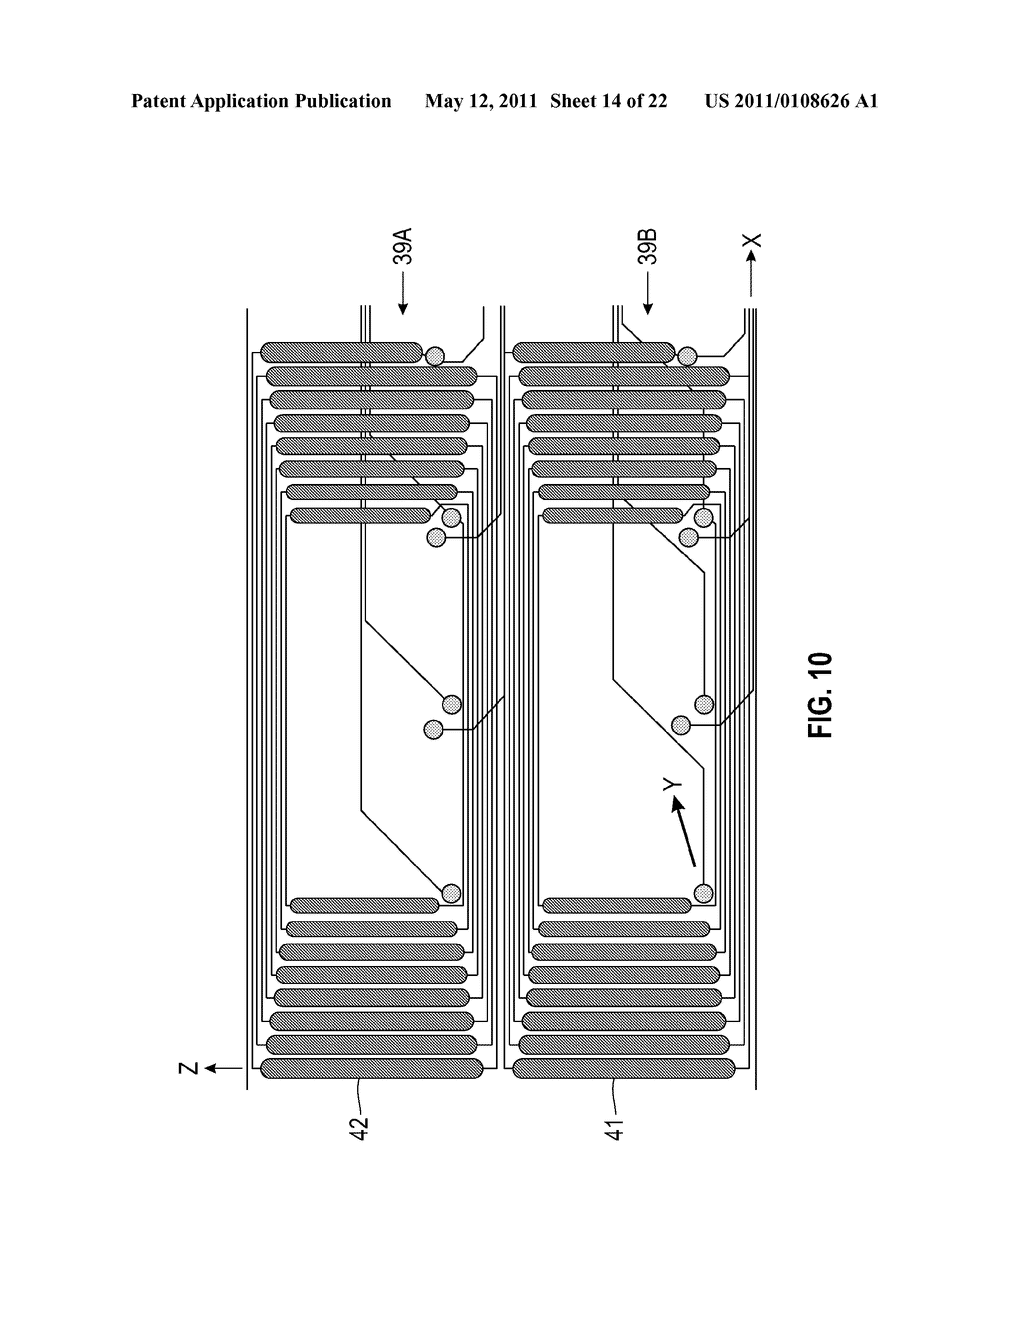 ELECTRONIC CARD AND METHOD FOR GENERATING A MAGNETIC FIELD FROM SWIPING THE ELECTRONIC CARD THROUGH A CARD READER - diagram, schematic, and image 15